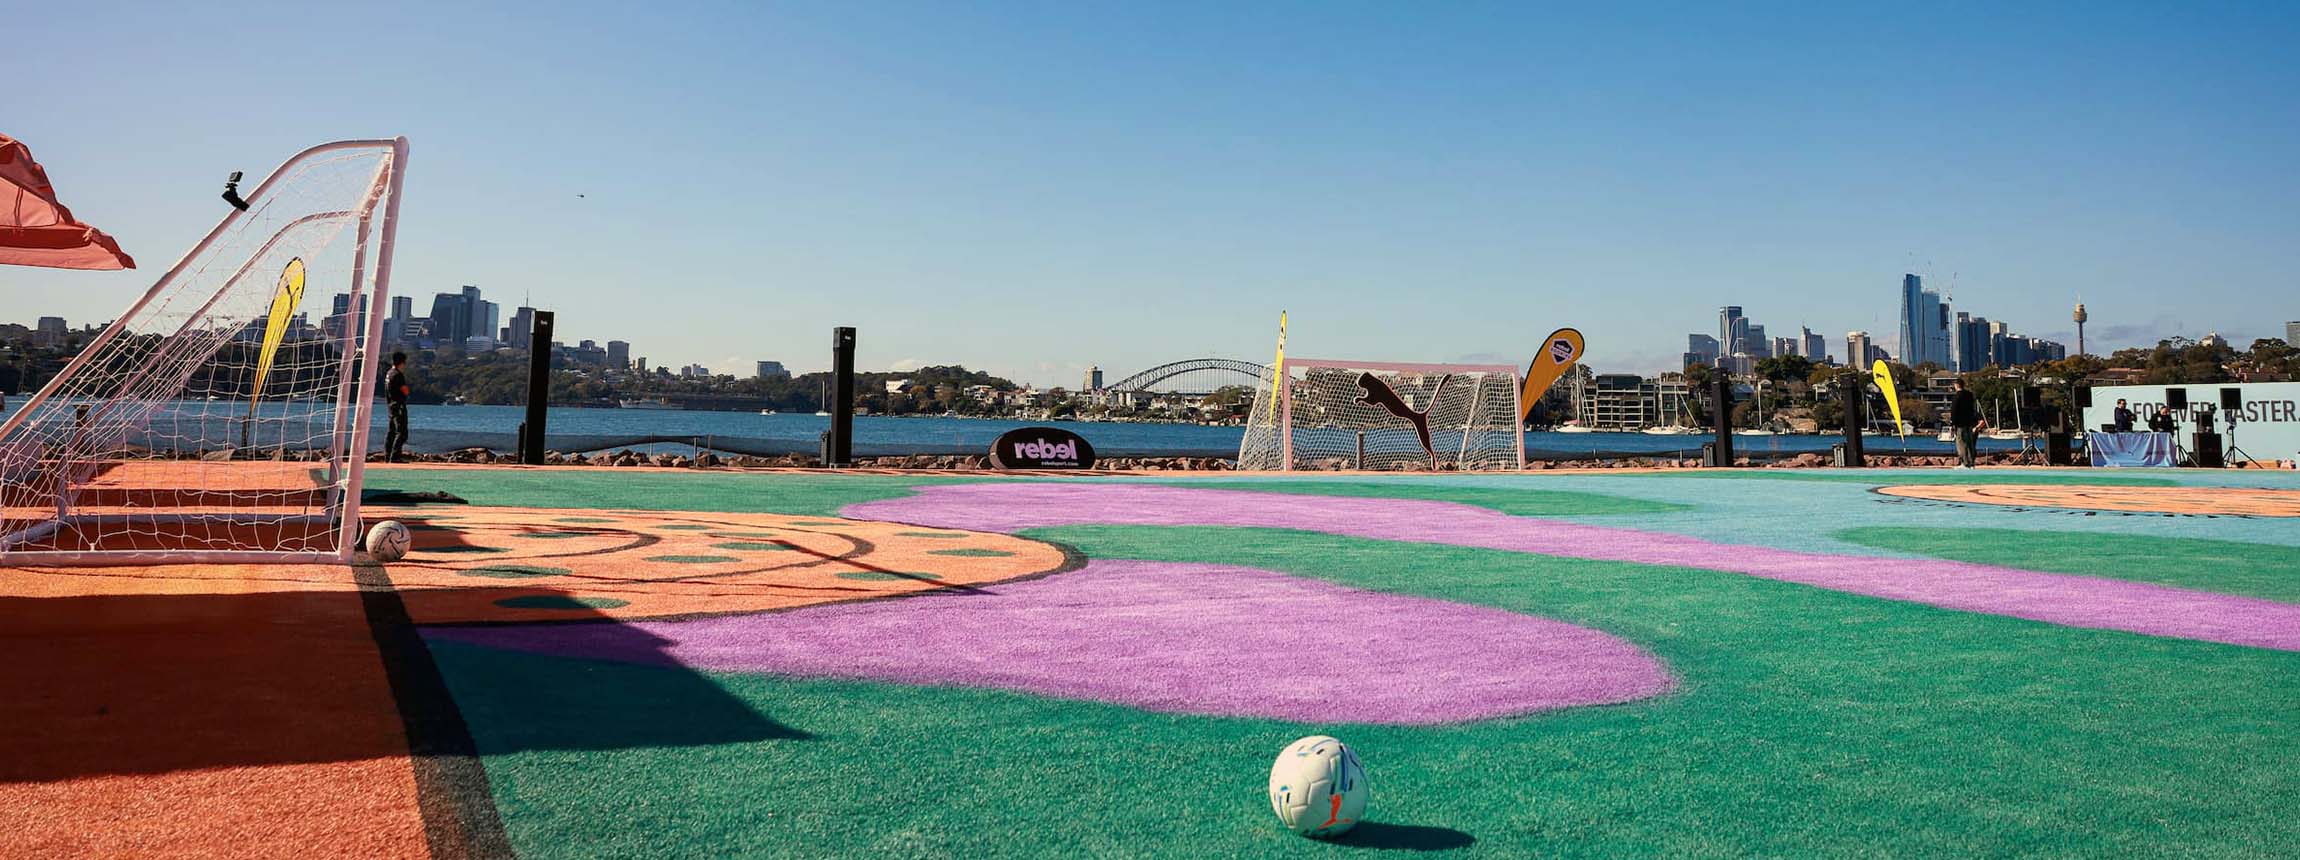 Puma pitch 4 with sydney harbor in background